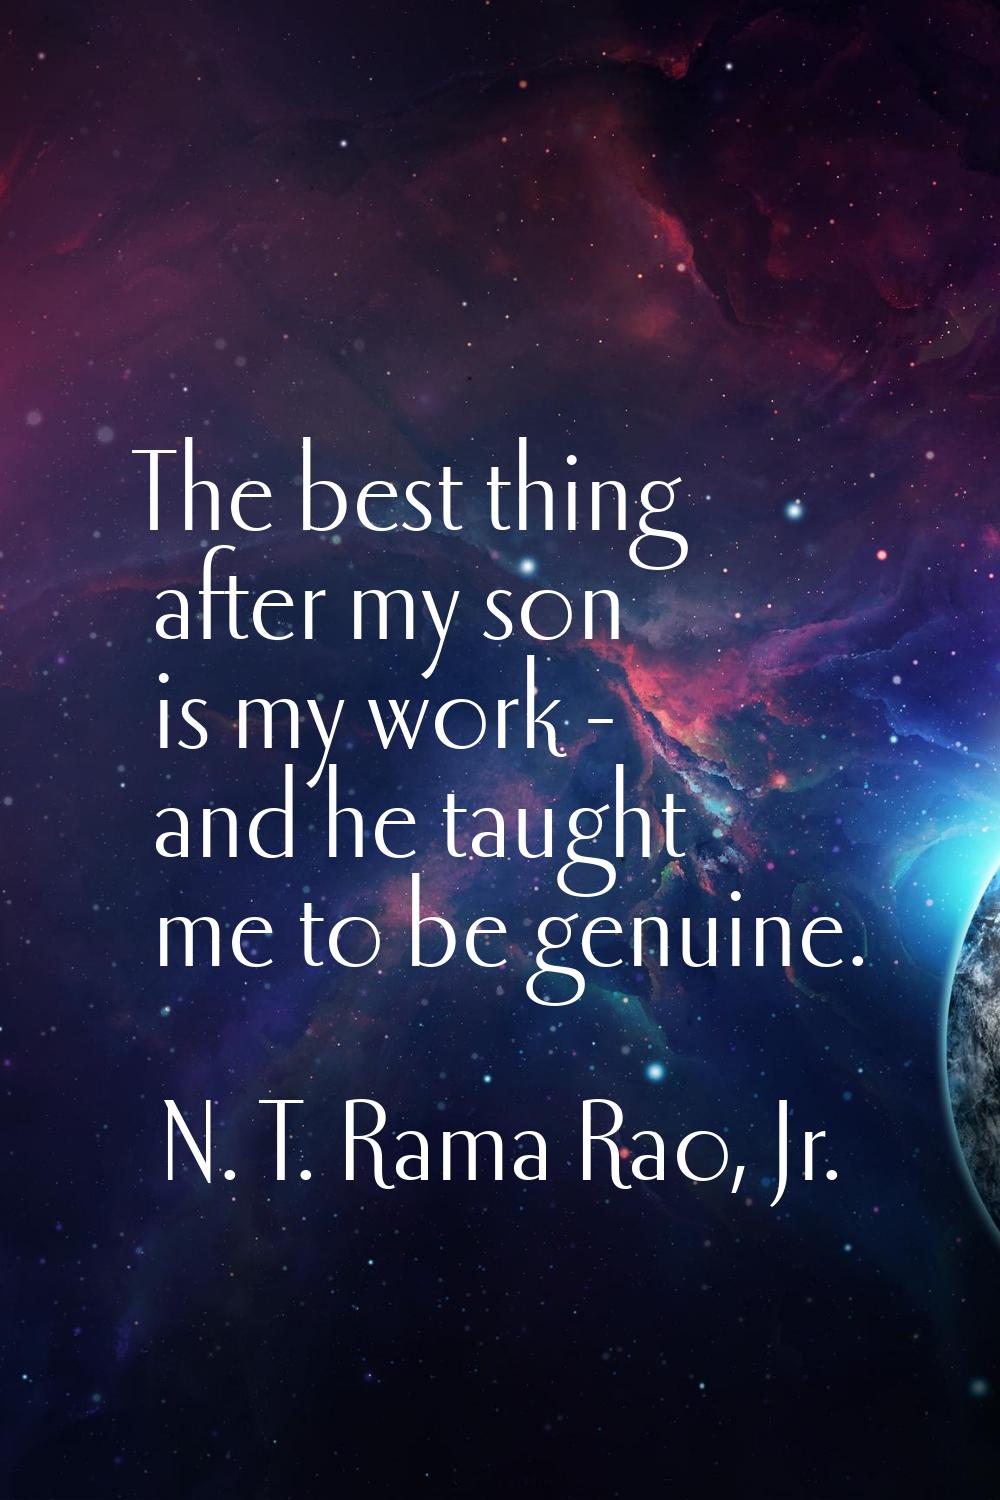 The best thing after my son is my work - and he taught me to be genuine.